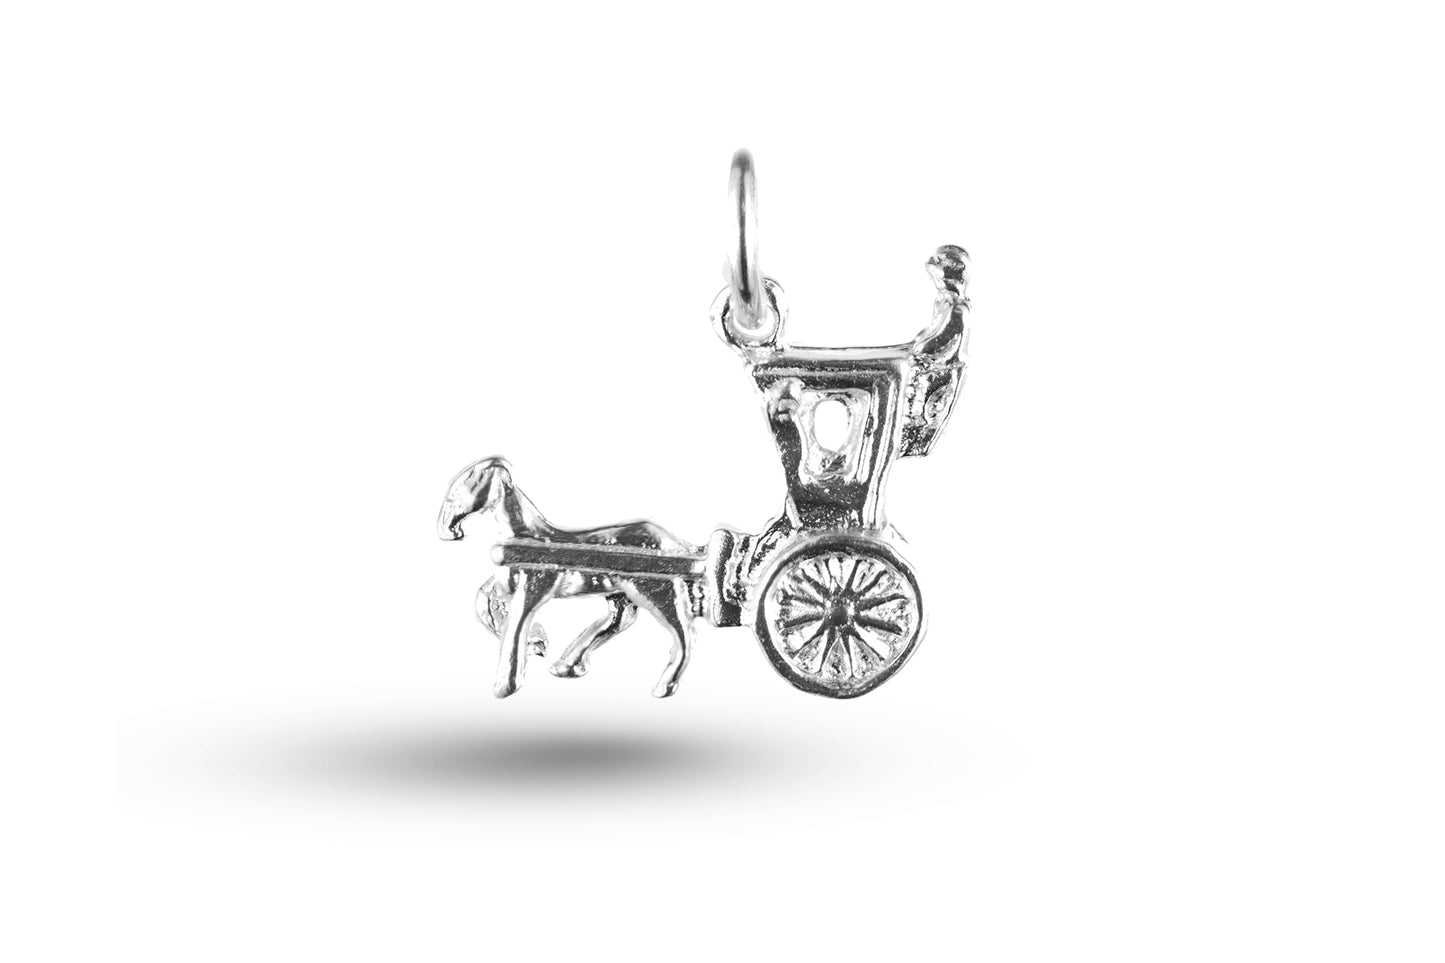 White gold Hanson Cab with Horse charm.